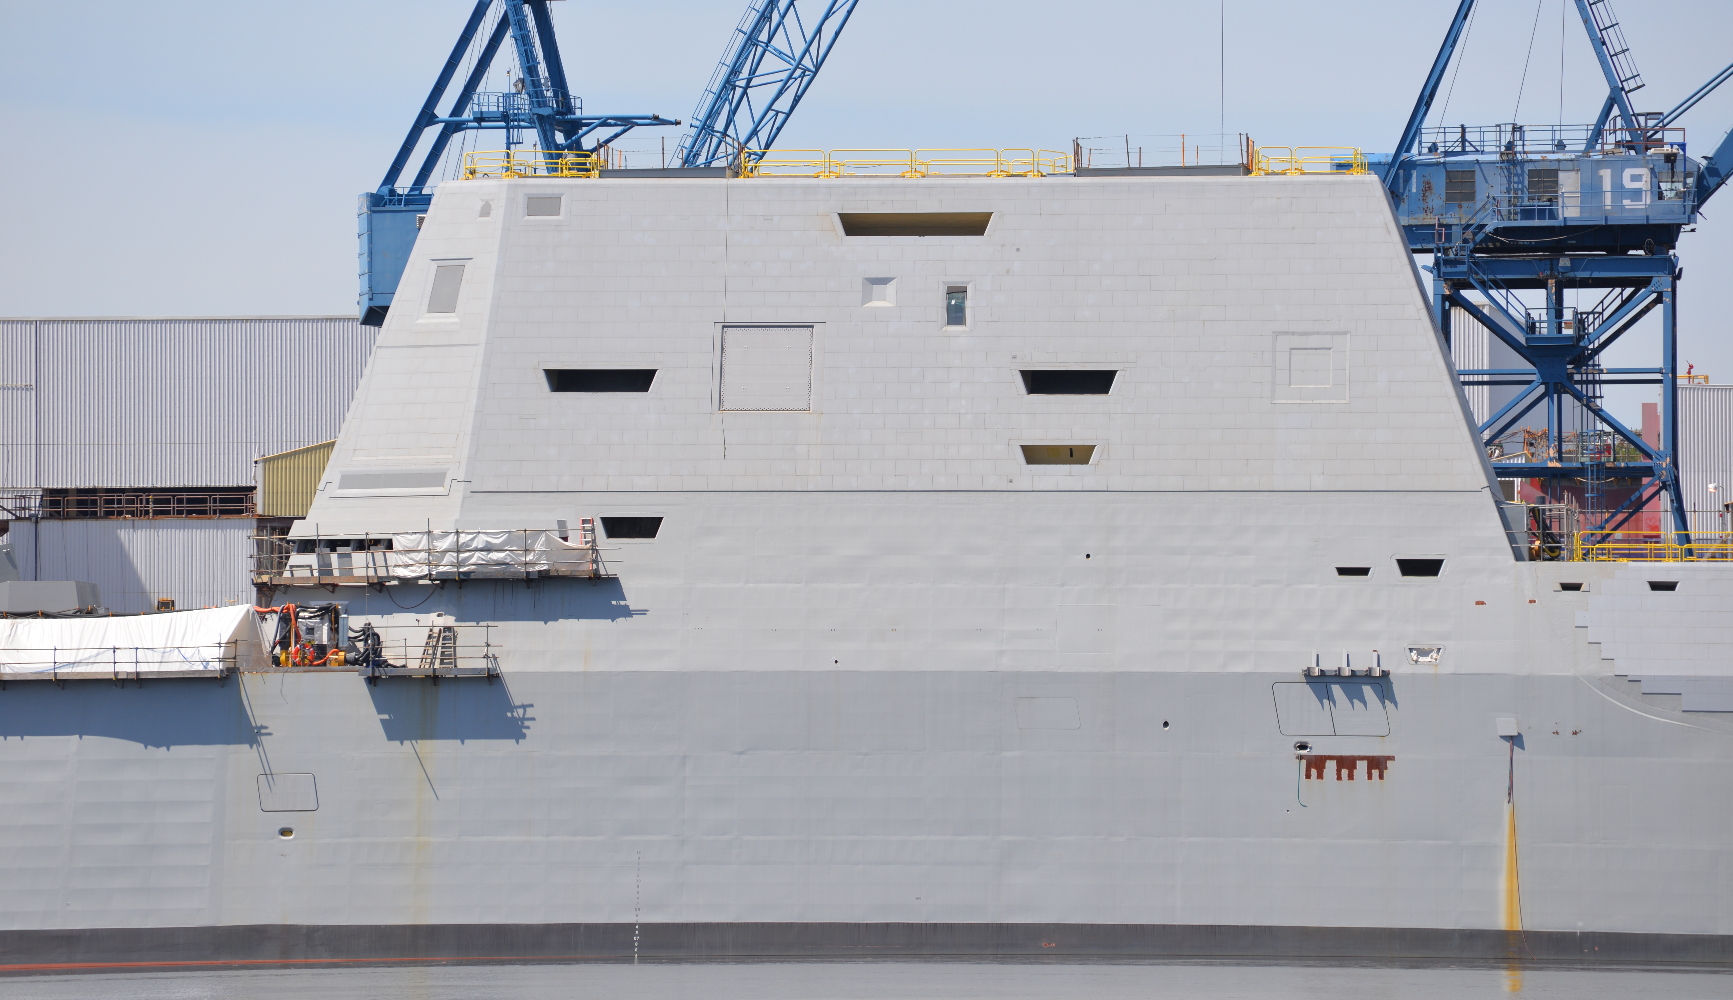 Closeup view of the Zumwalt's superstructure. The deckhouse above the bridge windows is a composite-material structure, built at Gulfport, Mississippi by Ingalls Shipbuilding and barged north to be installed in Maine. A similar structure is being built for the Michael Monsoor, but the Lyndon B. Johnson will have a steel structure built at Bath. 